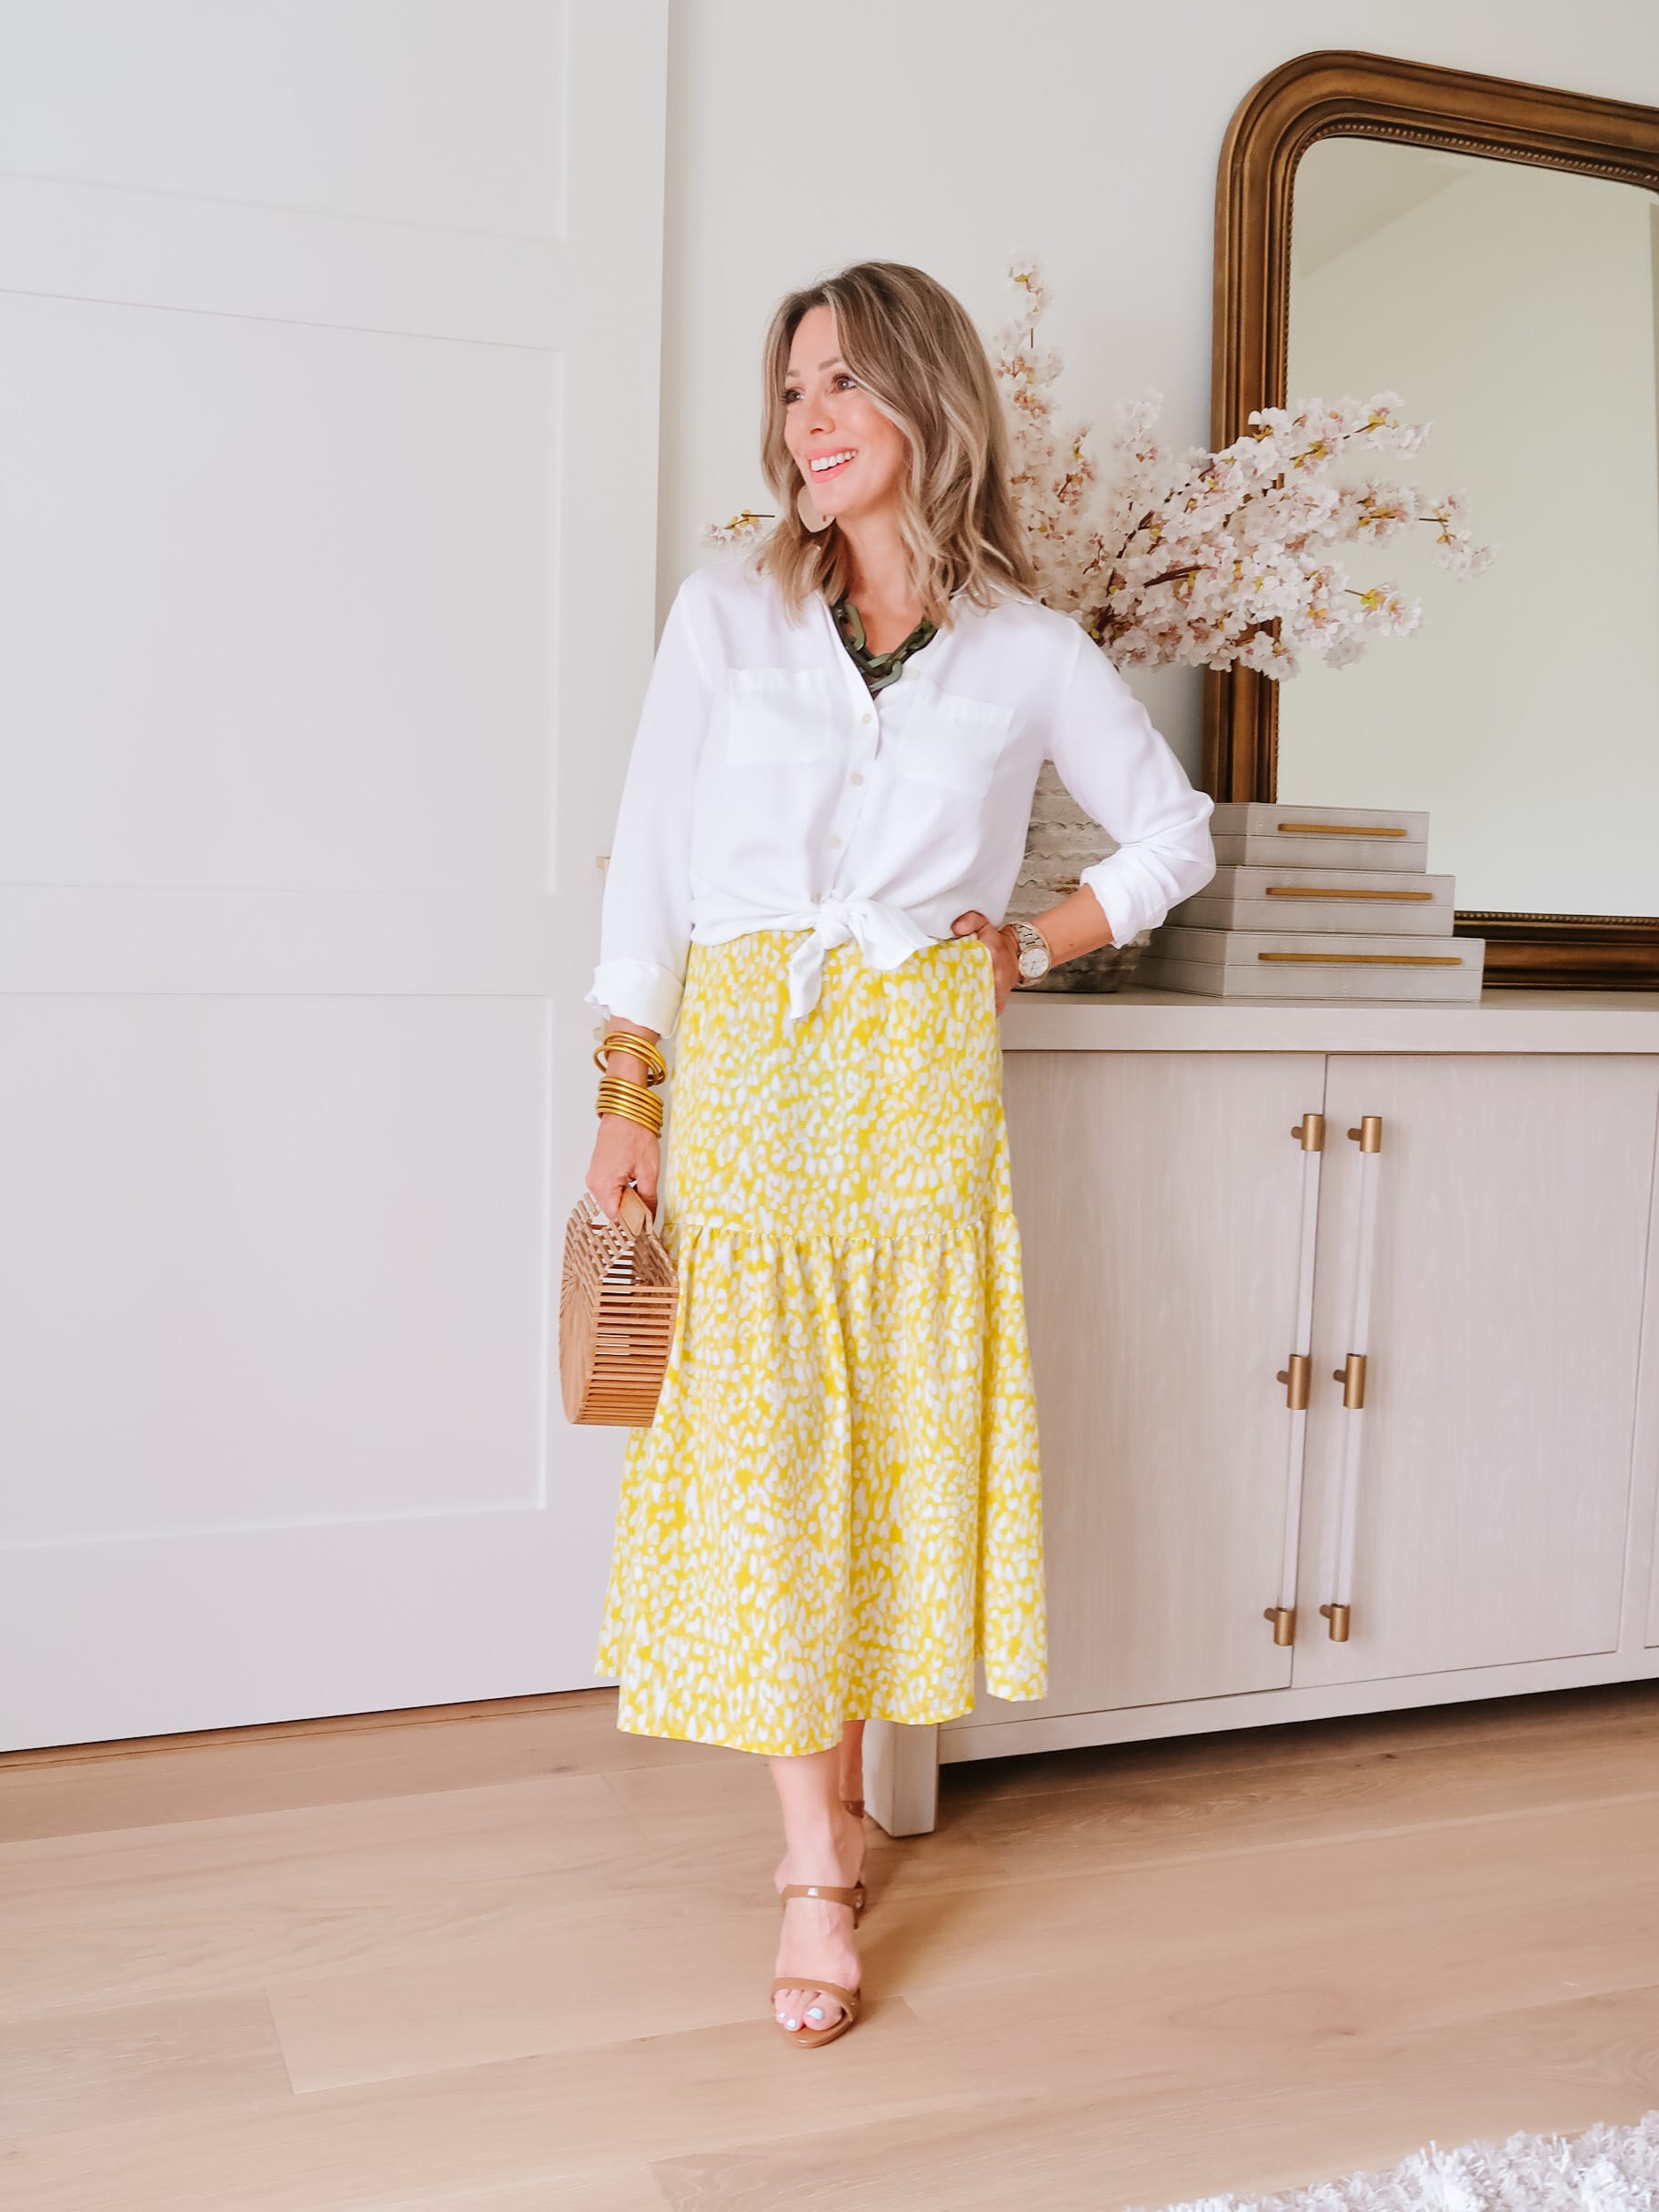 White Button Down, Yellow Skirt, Sandals, Bamboo Clutch